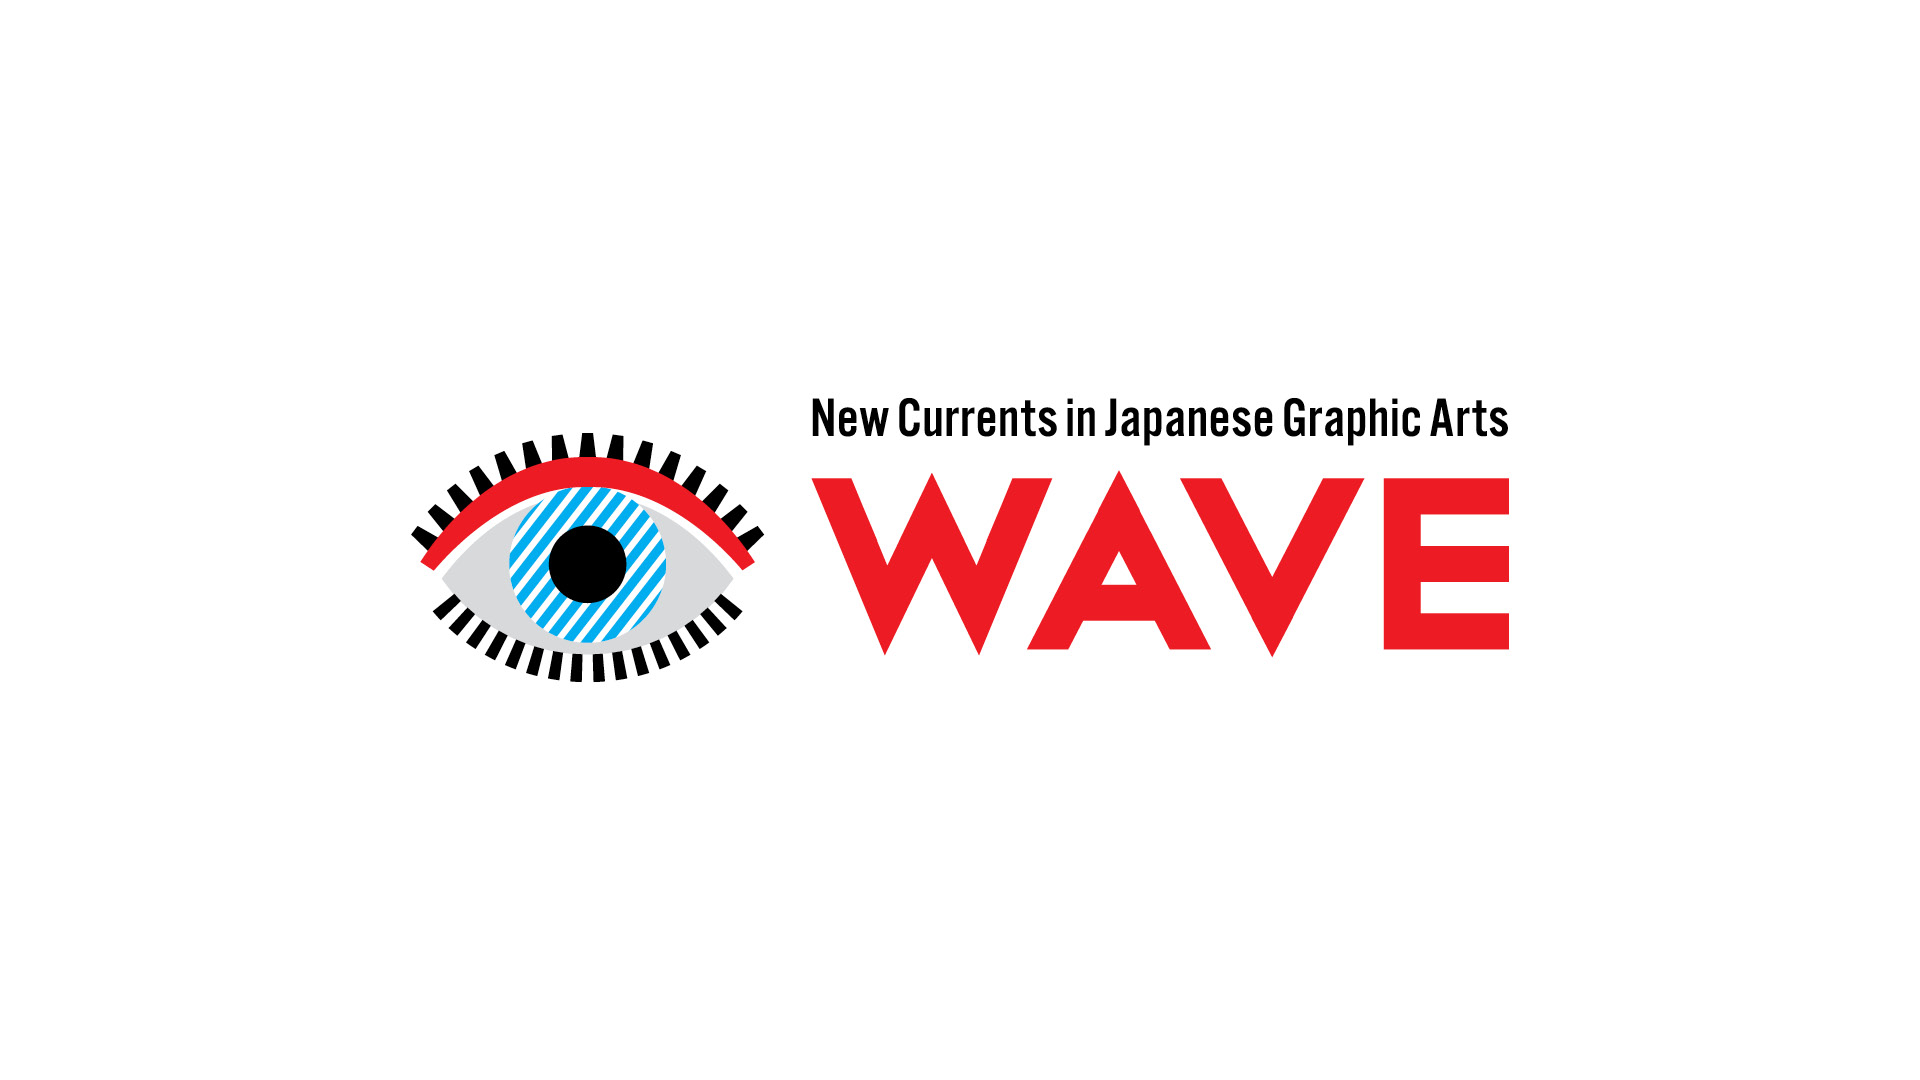 WAVE - New Currents in Japanese Graphic Arts